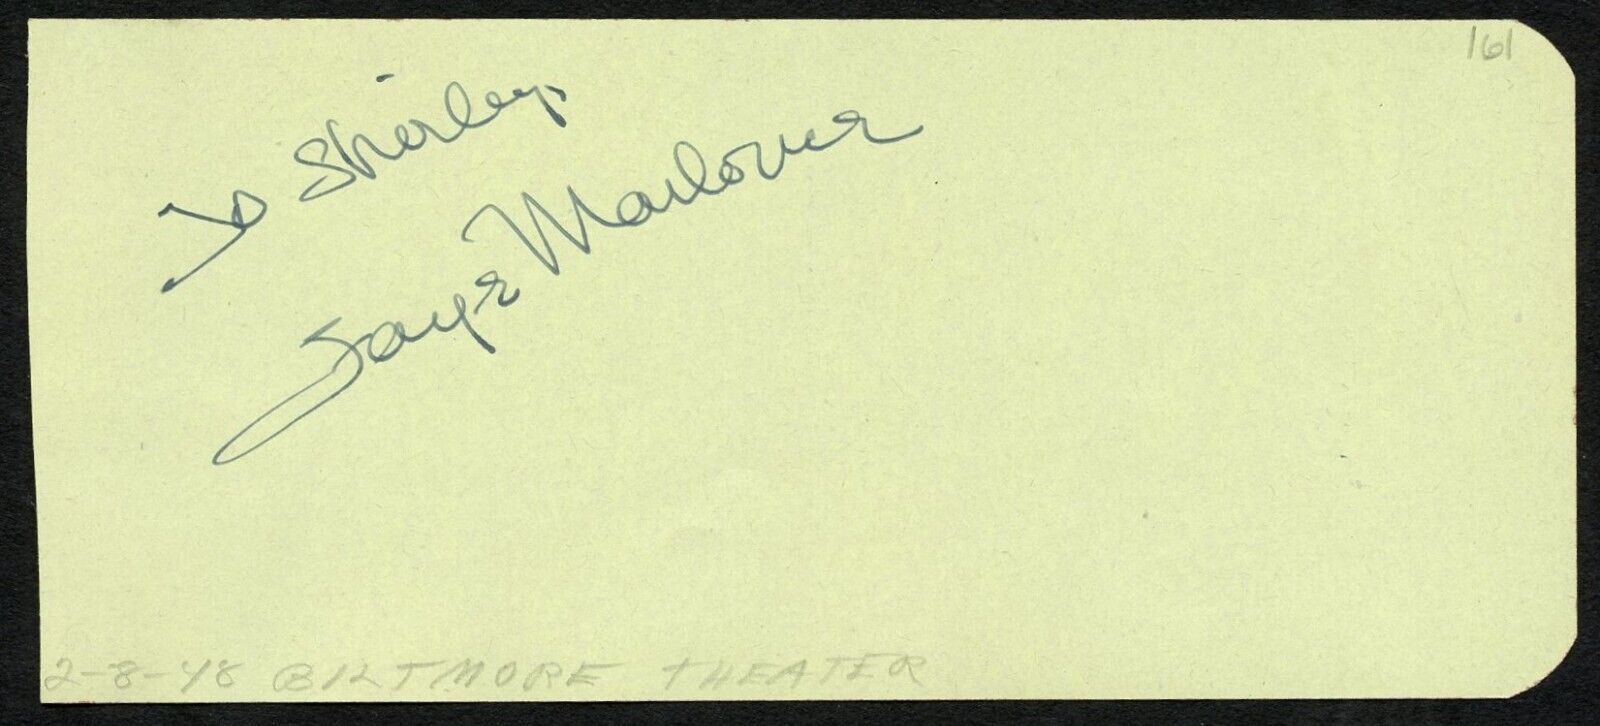 Faye Marlowe d2022 signed 2x5 autograph on 2-8-48 at Biltmore Theater Hollywood